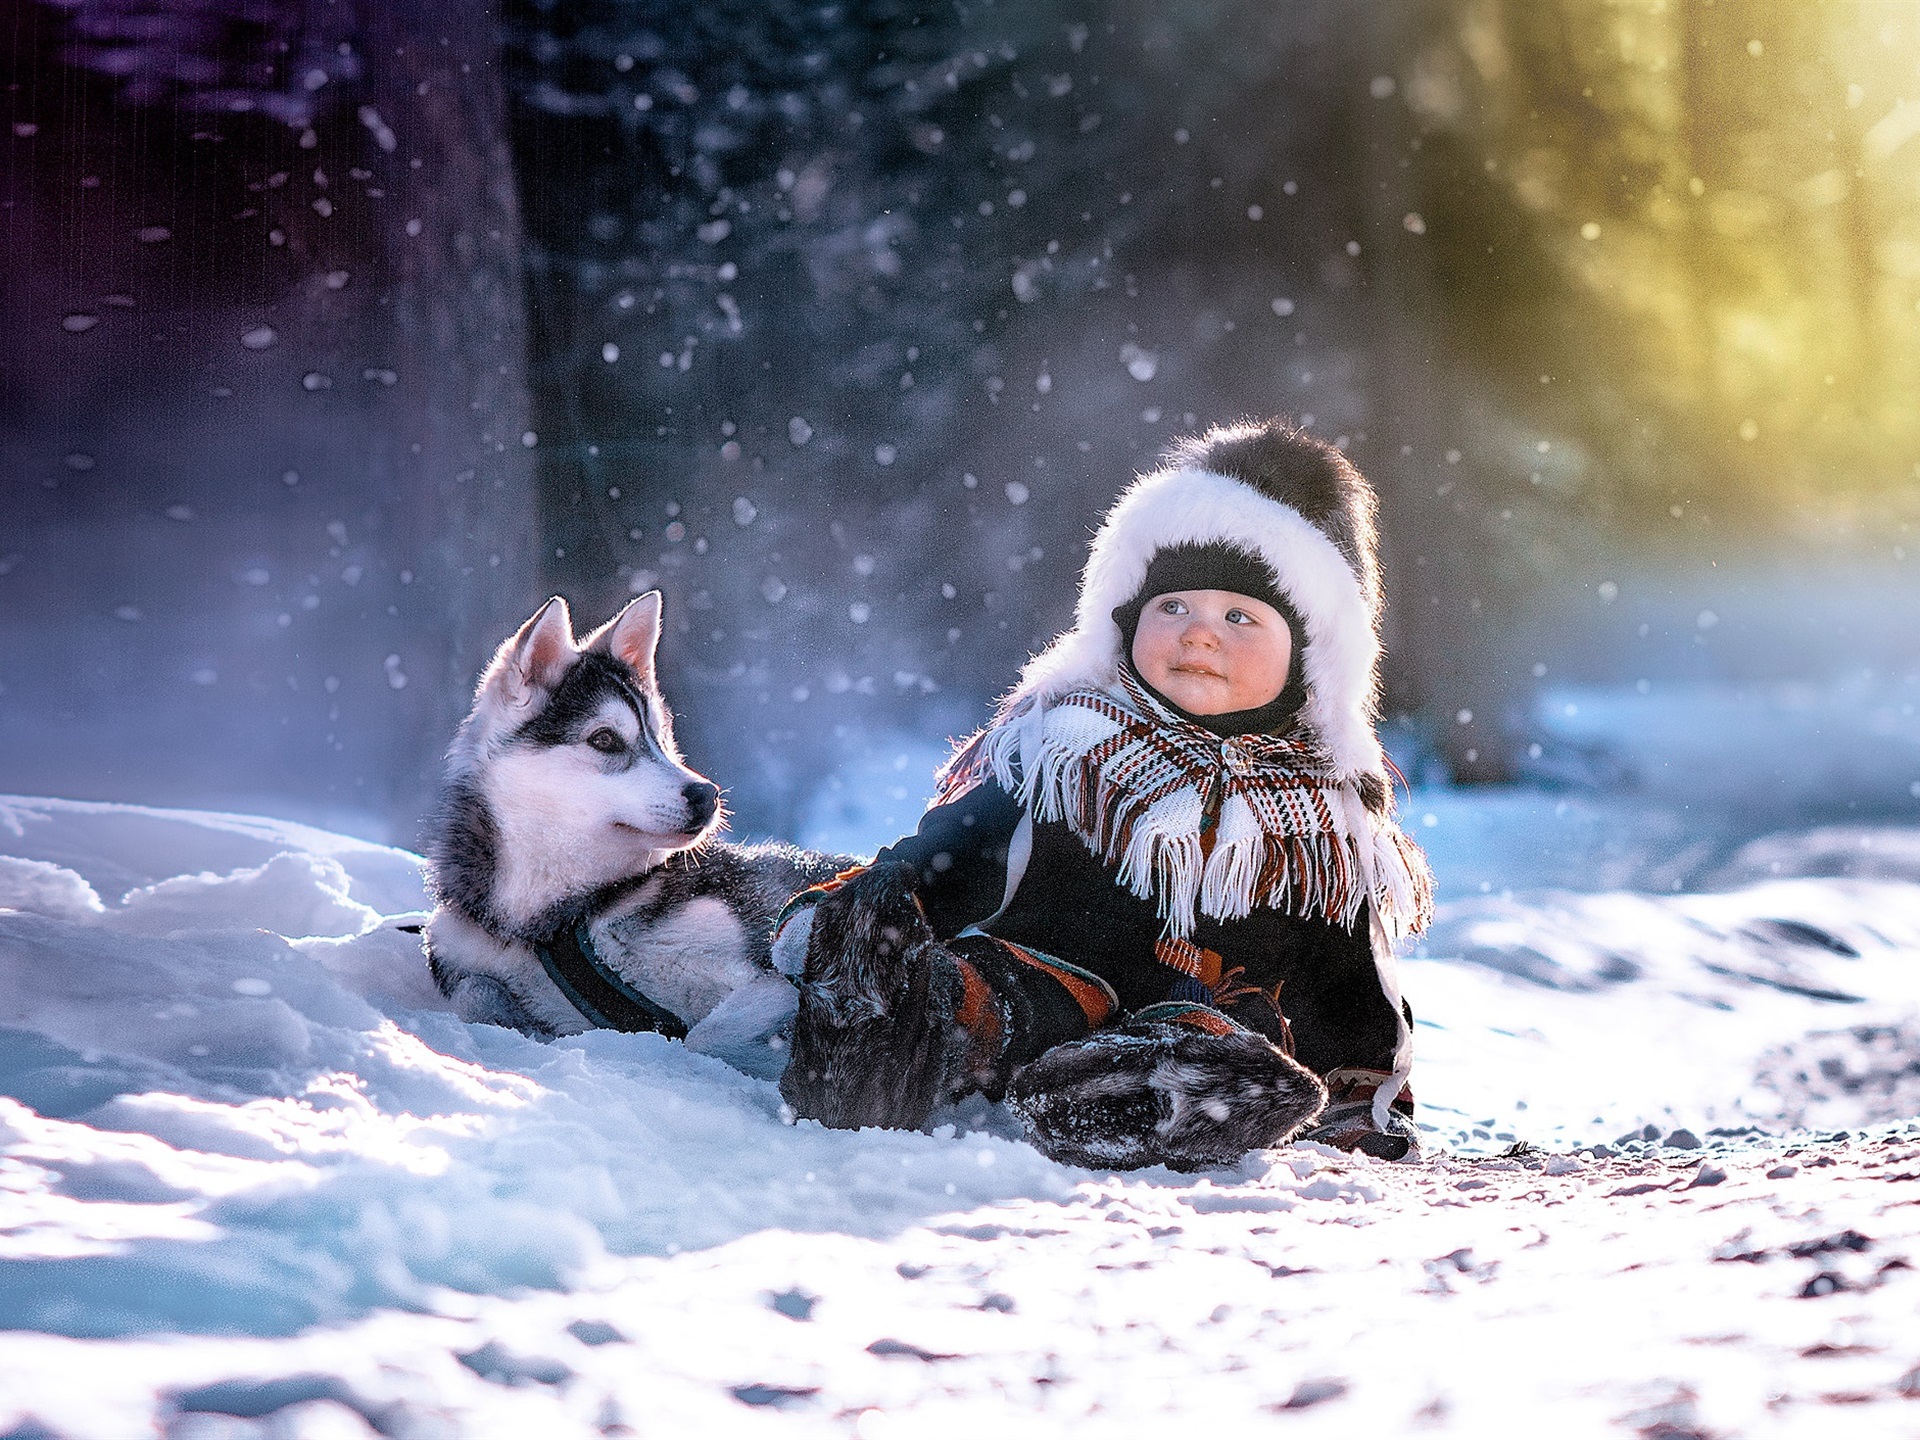 Wallpaper Child and husky dog in winter, snow 1920x1440 HD